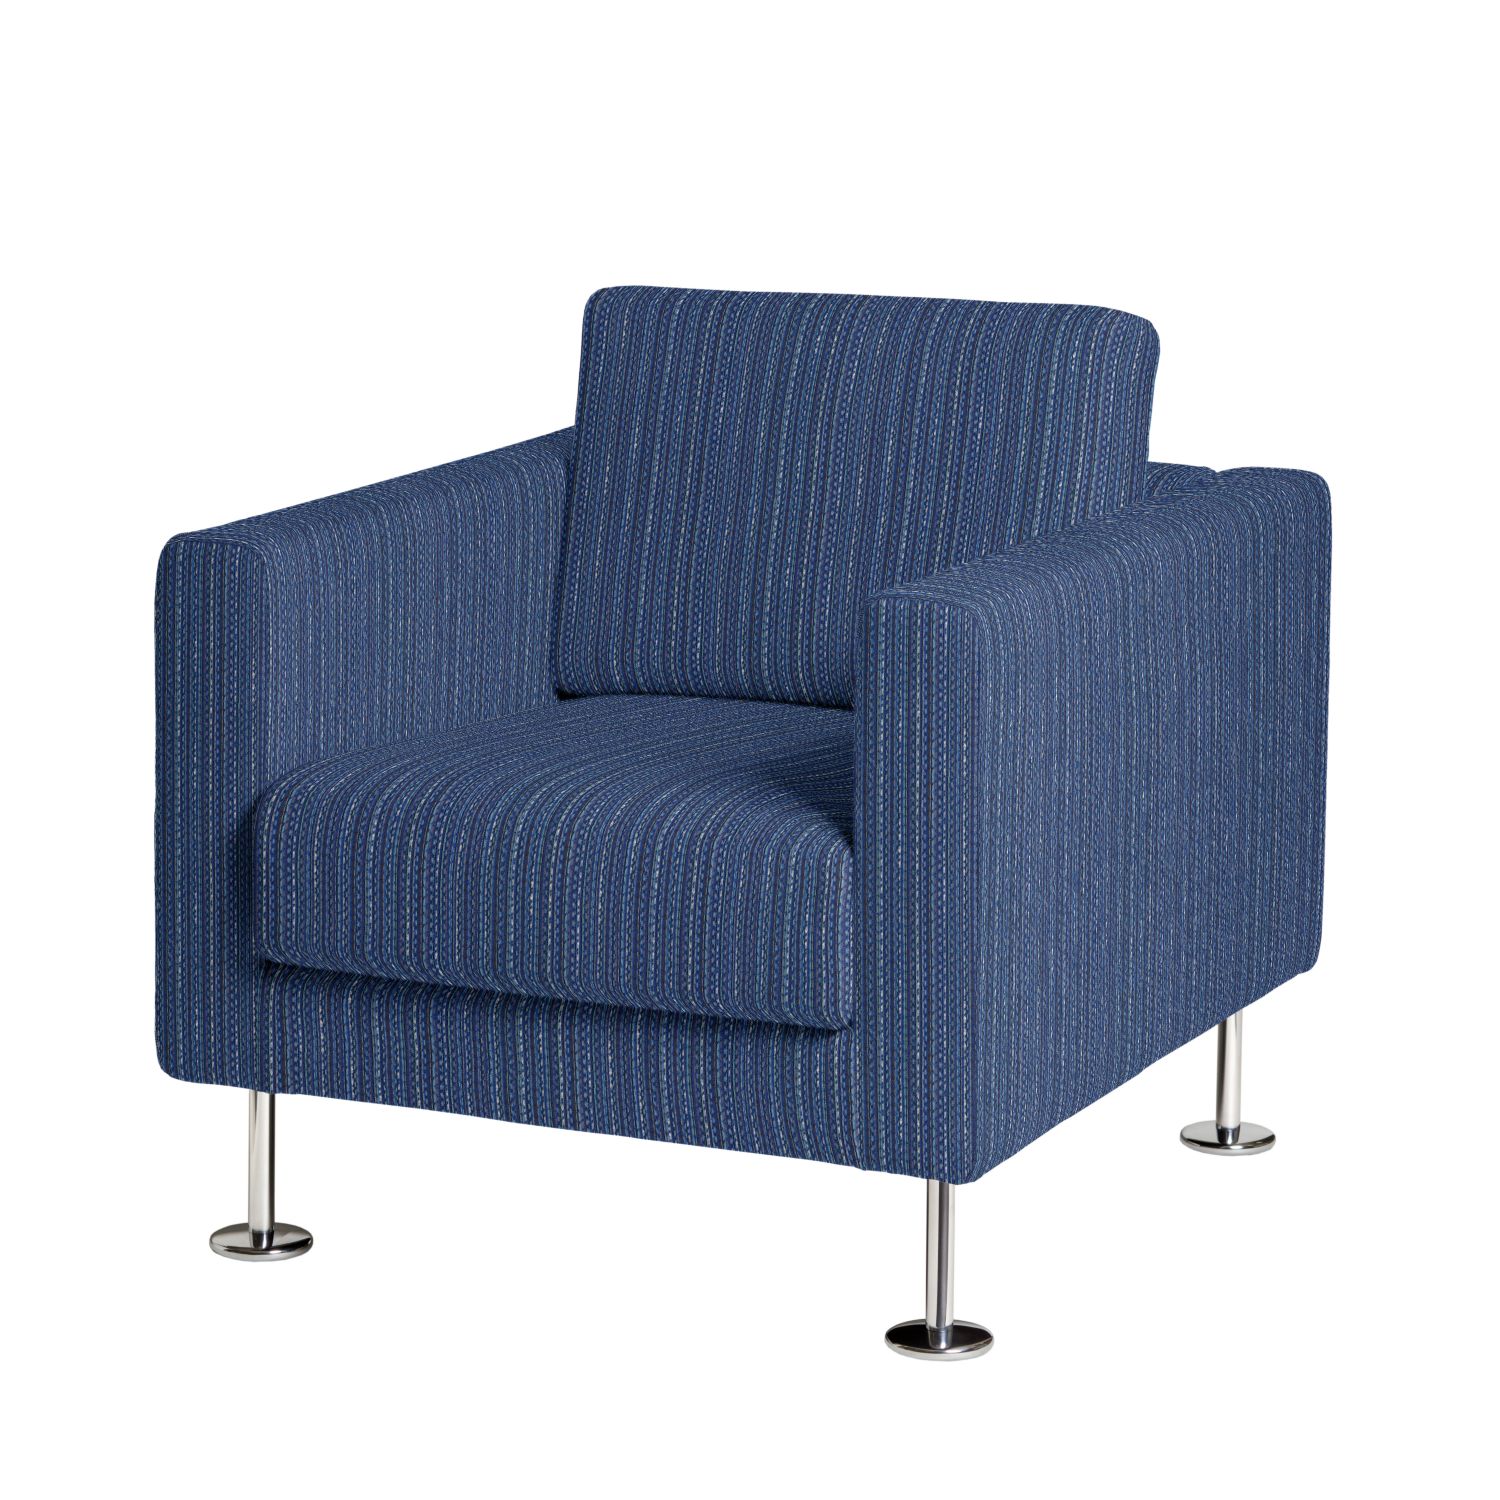 LGE 7056 - Lineage - Blue | Upholstery - Wolf-Gordon